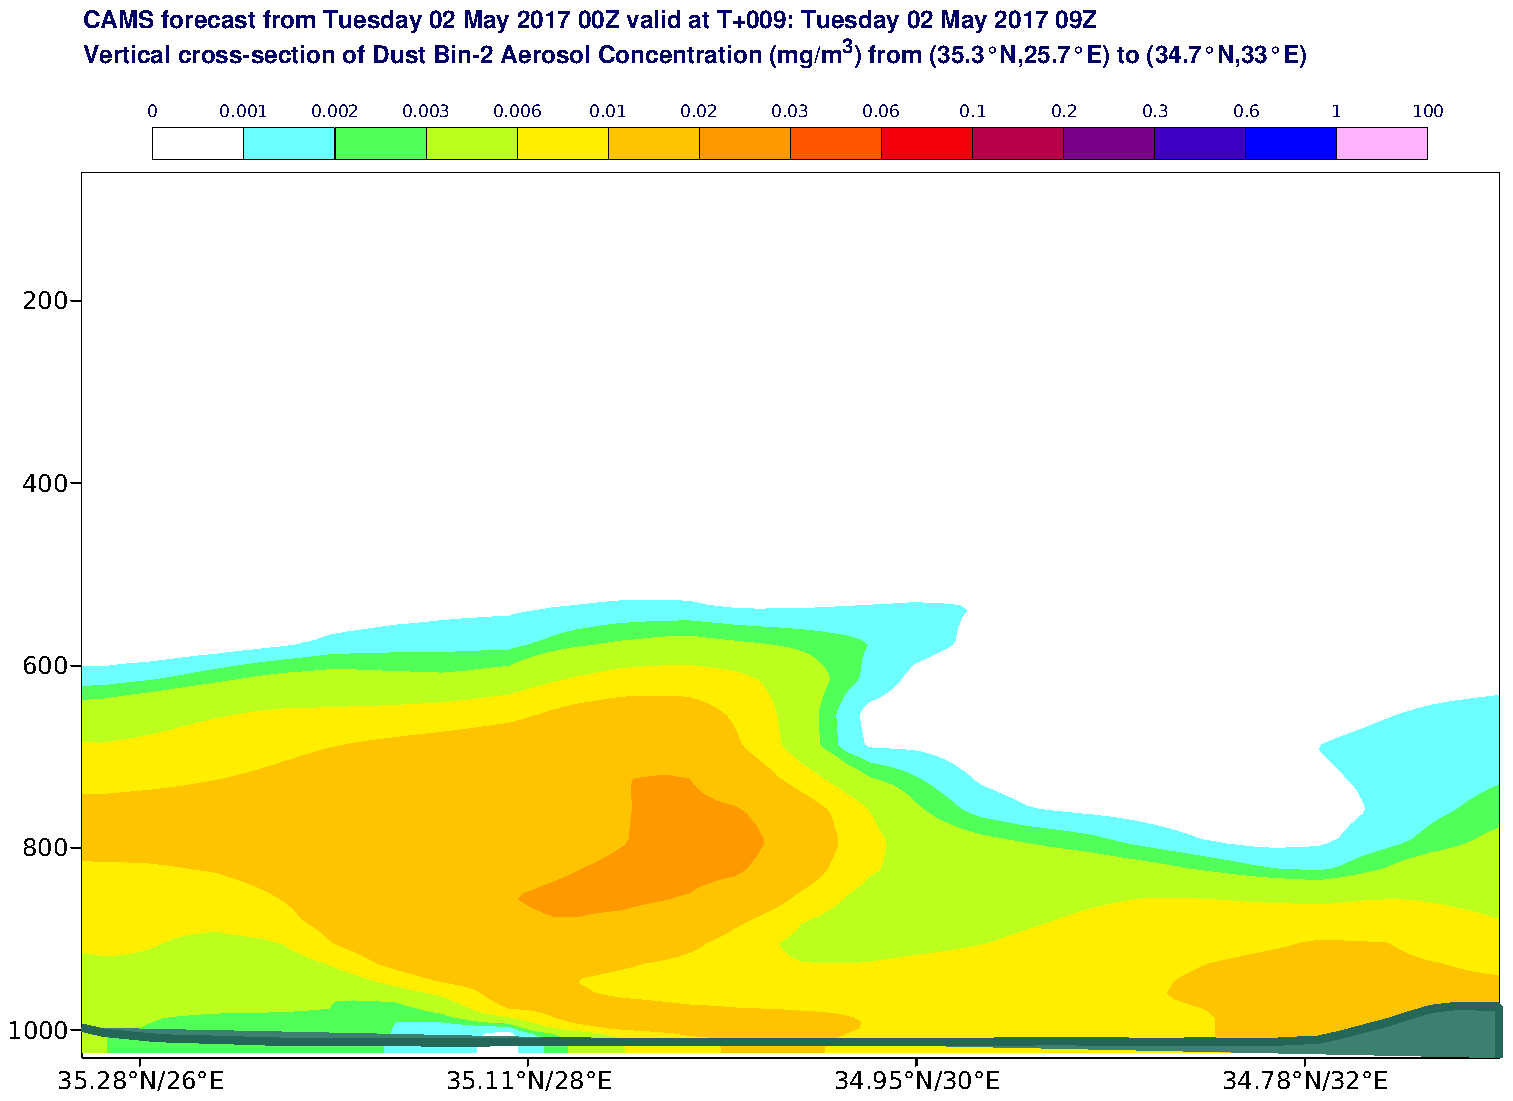 Vertical cross-section of Dust Bin-2 Aerosol Concentration (mg/m3) valid at T9 - 2017-05-02 09:00